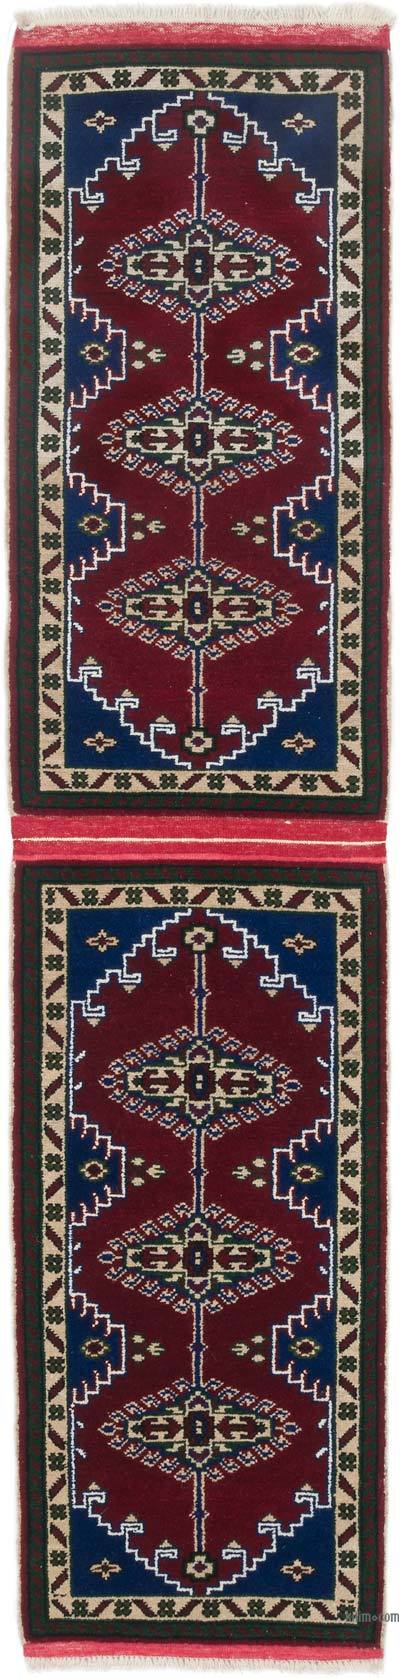 Vintage Turkish Hand-Knotted Runner - 1' 9" x 7' 7" (21 in. x 91 in.)